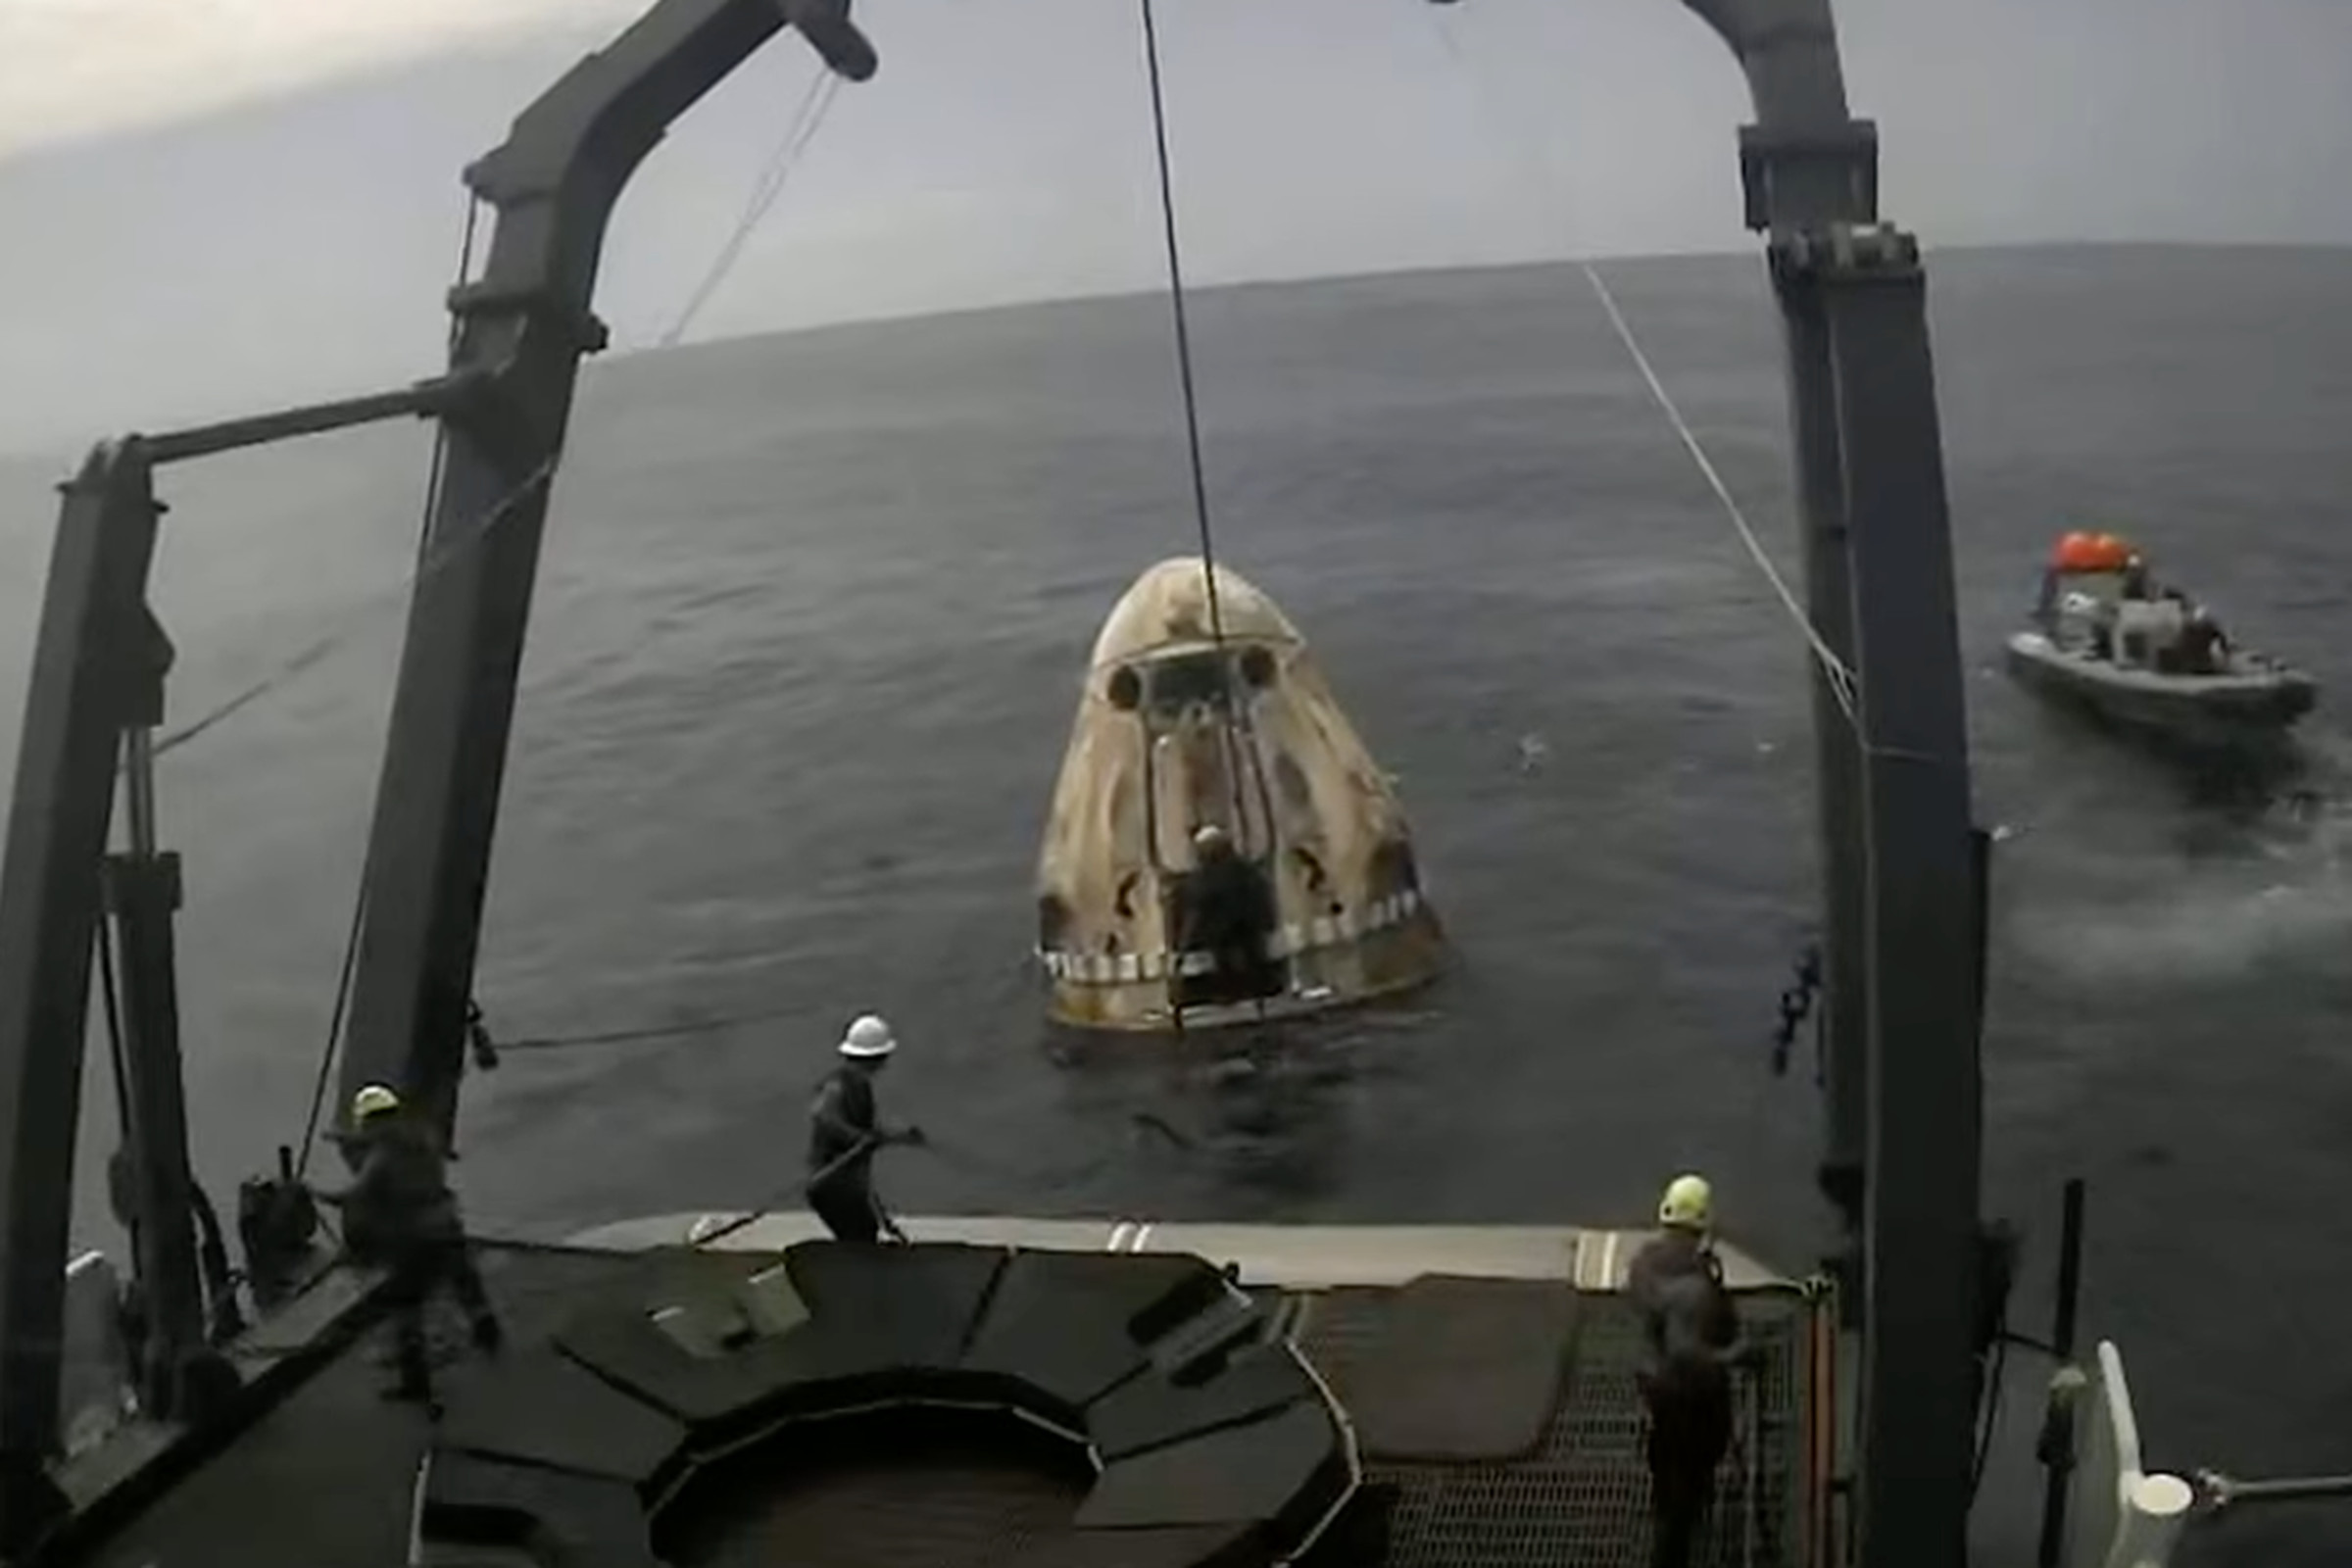 A crew dragon capsule bobs in the water, connected to a larger boat with tethers